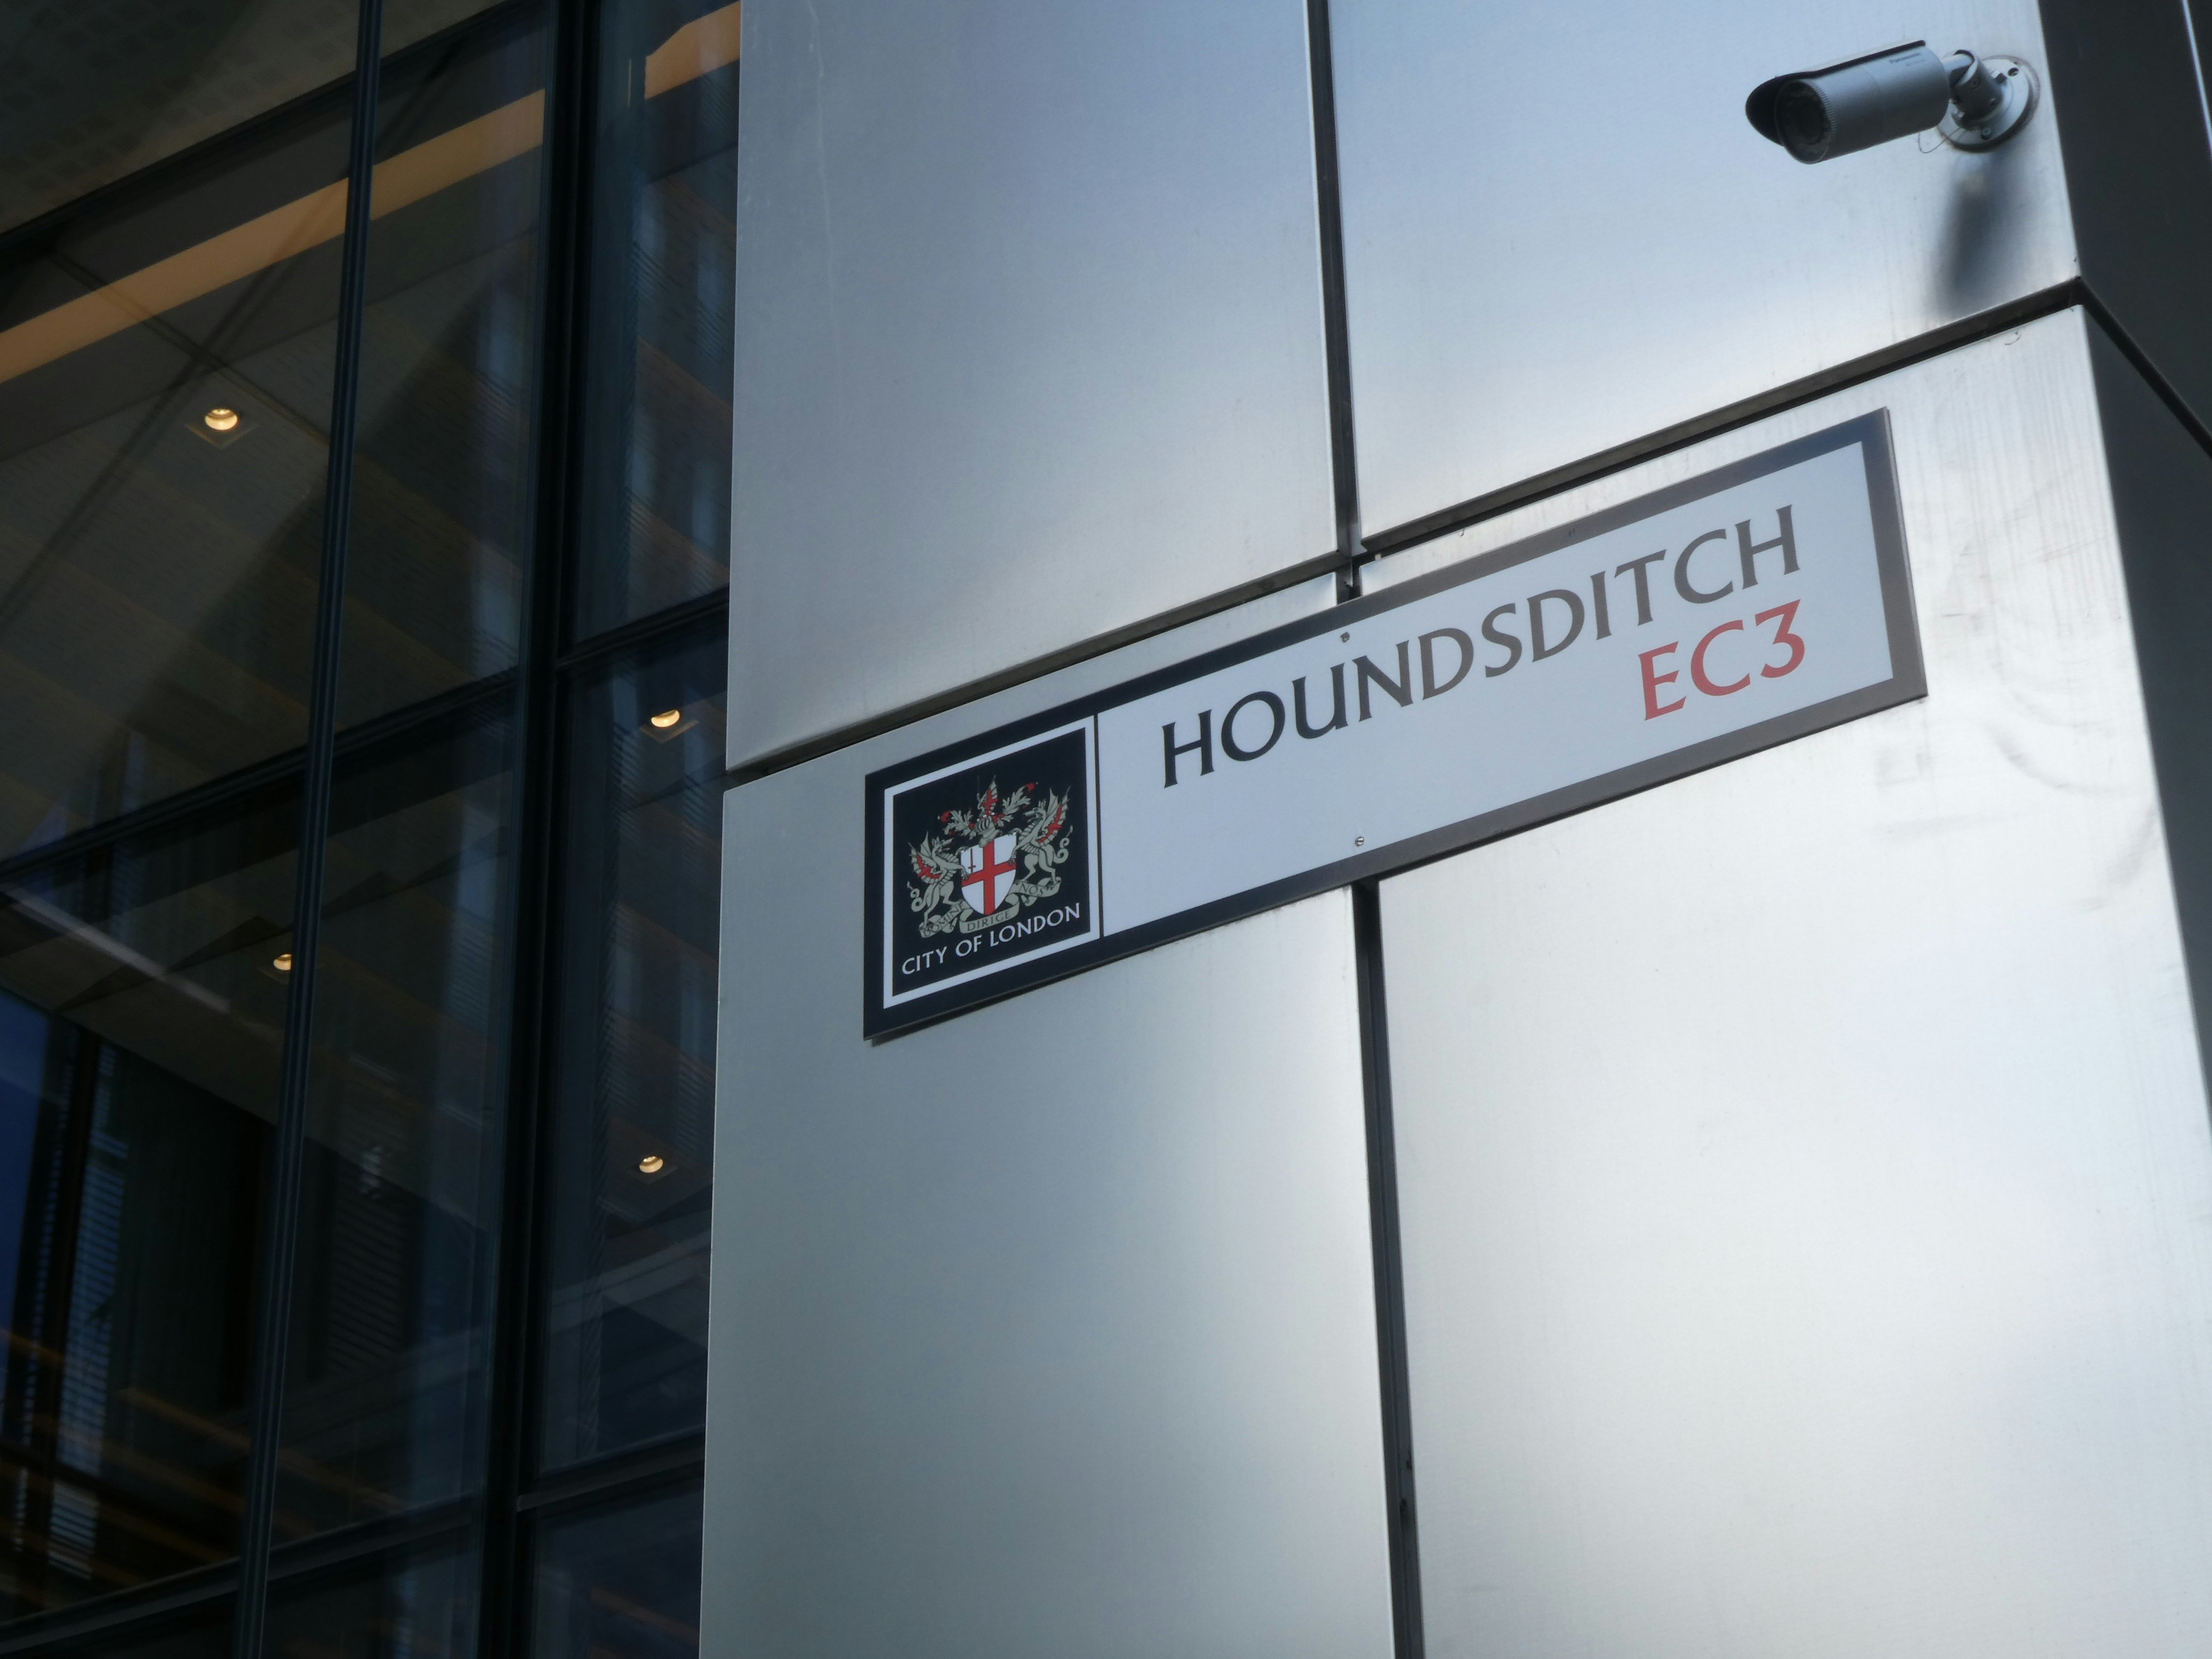 A sign for Houndsditch in the City of London, as seen on the side of Heron Tower at the junction with Bishopsgate.